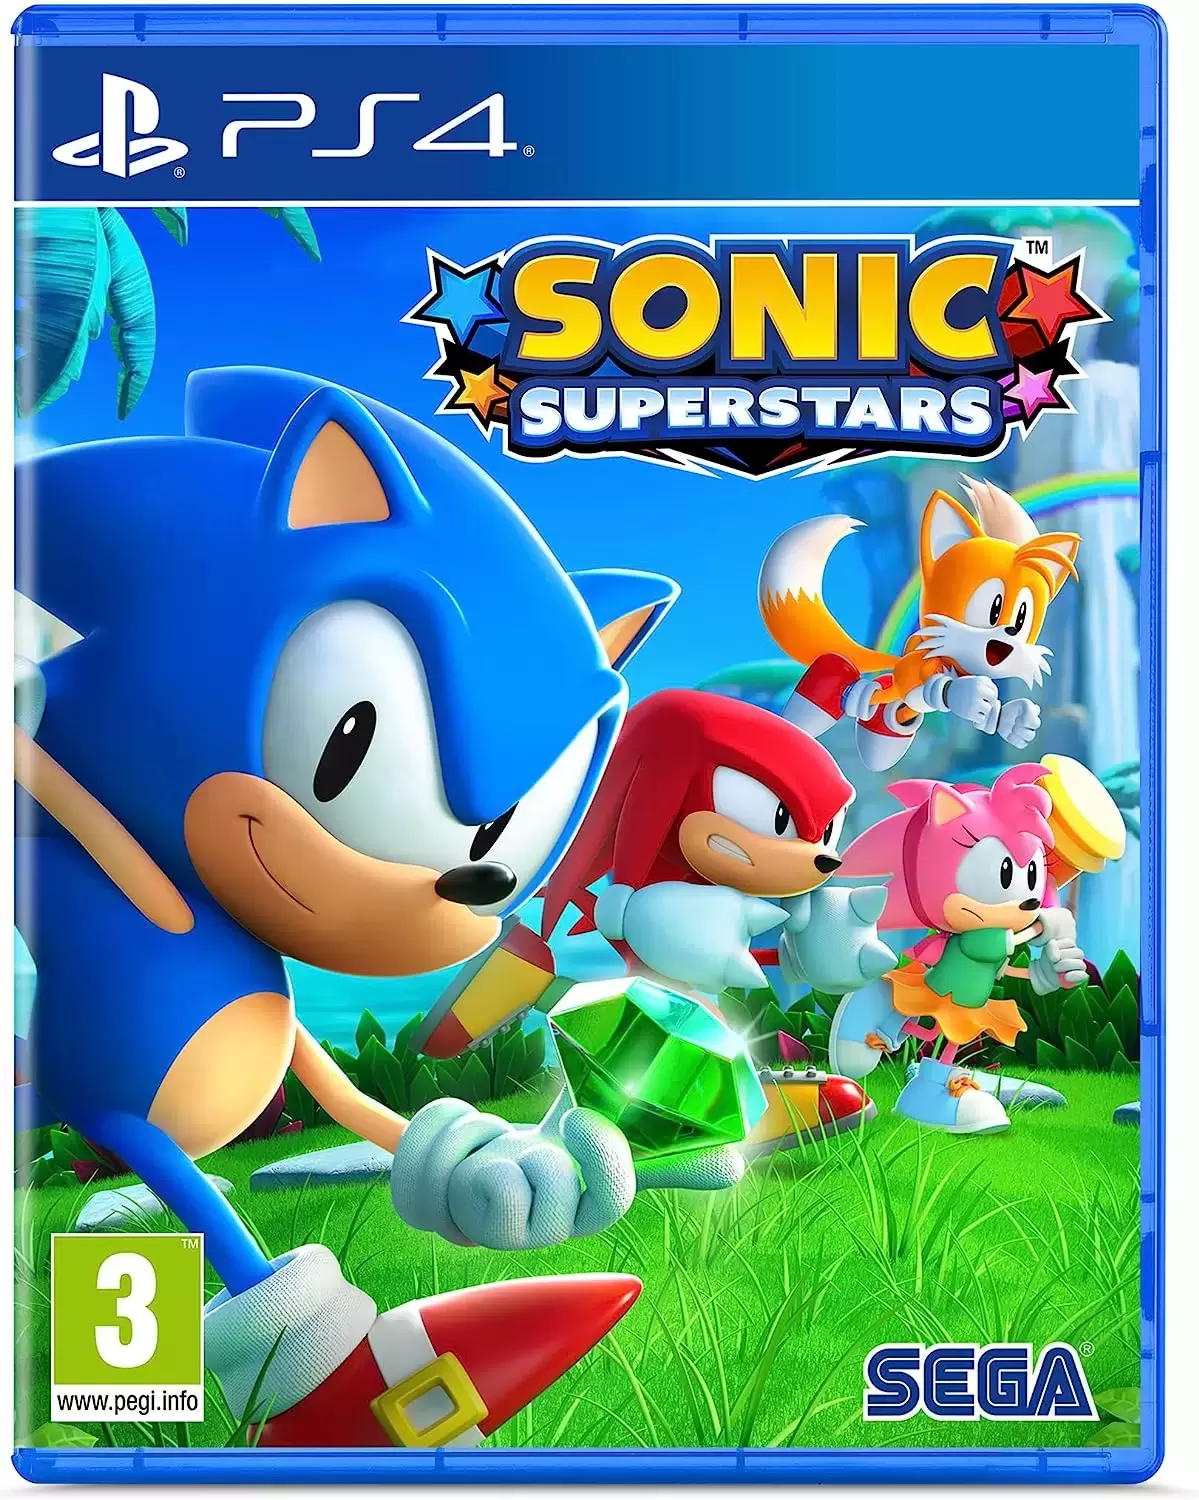 PS4 Games - Sonic Superstars